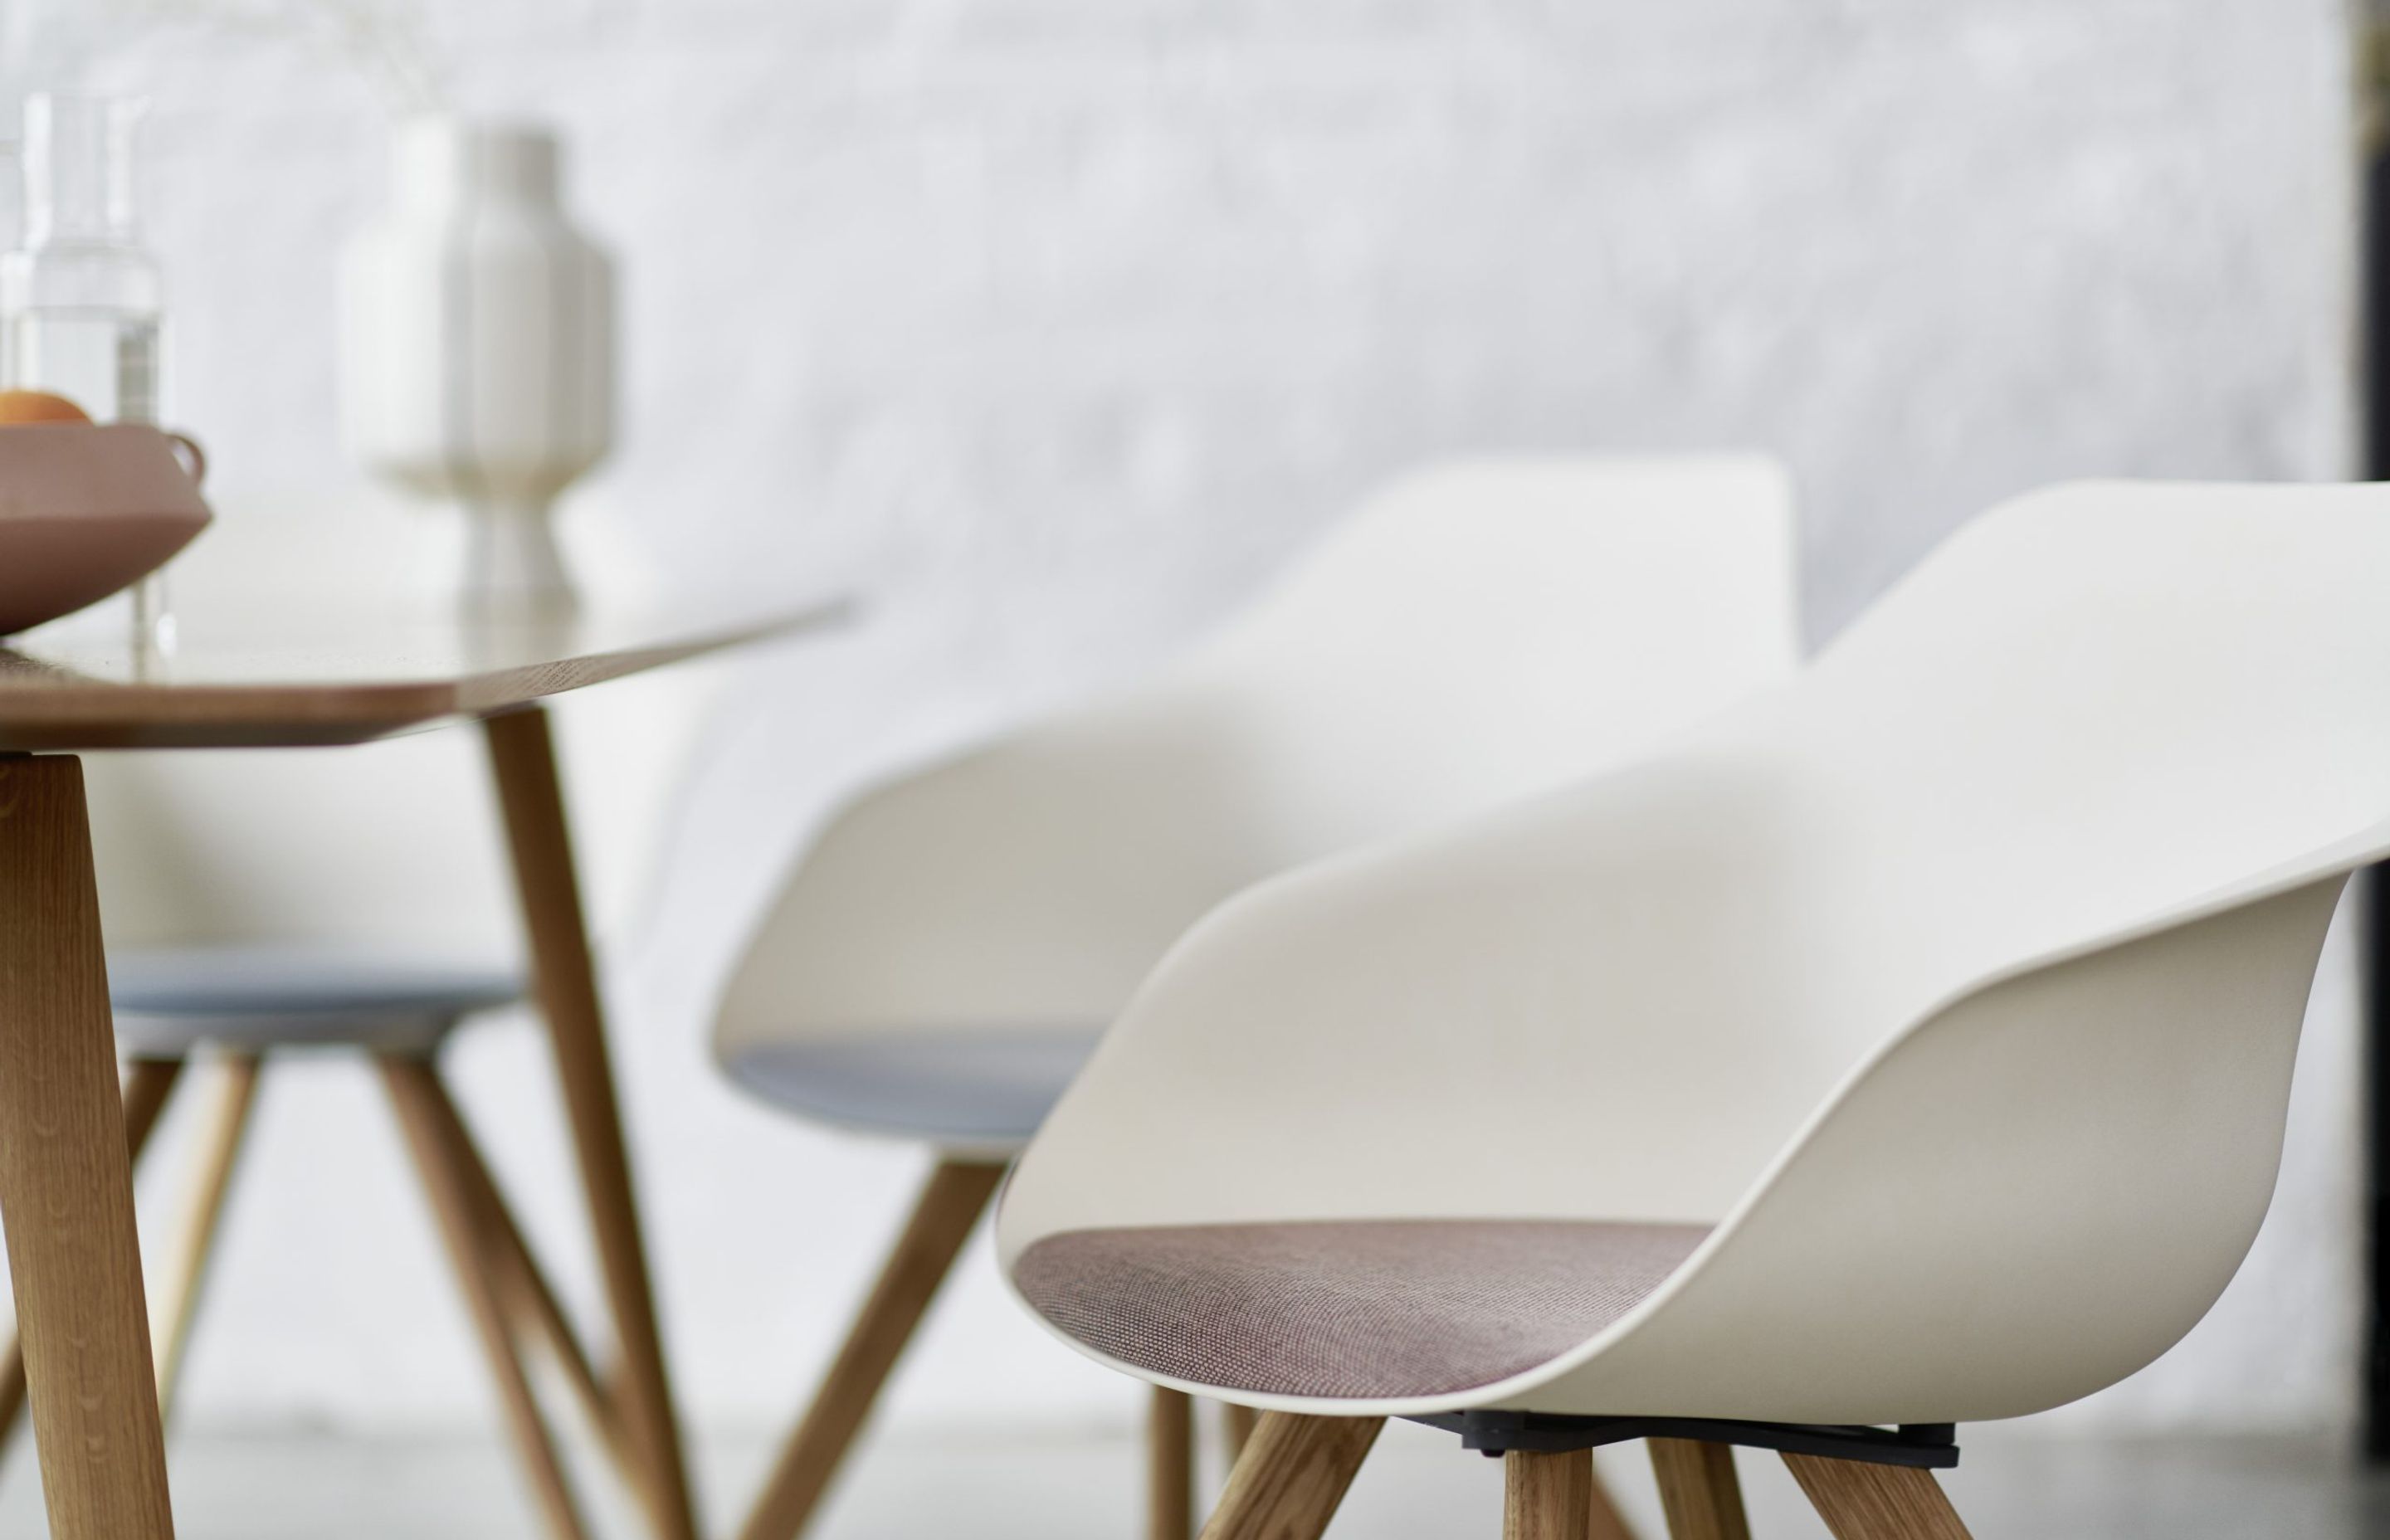 Launched in 2021, the new Yonda (by neunzig°design) is an attractive shell-structure chair range where state-of-the-art design and exceptional comfort are based on a construction and materials that are ideal for a circular economy. All of which whets our appetite for a sustainable future.